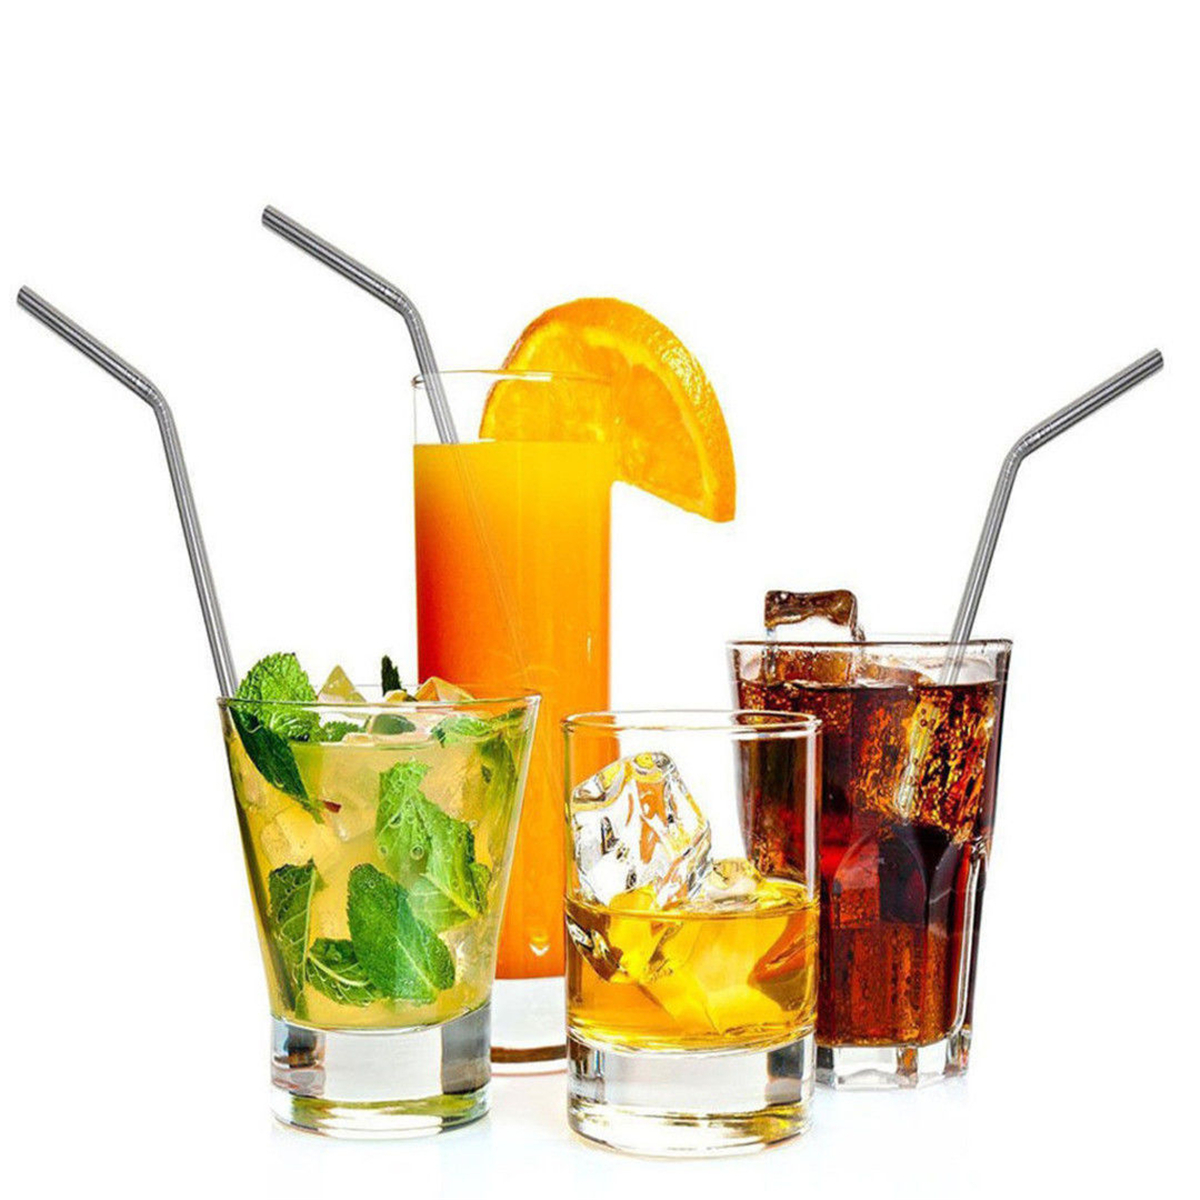 Stainless-Steel-Metal-Drinking-Straw-Reusable-Juice-Pipe--Cleaner-Brush--Box-1324939